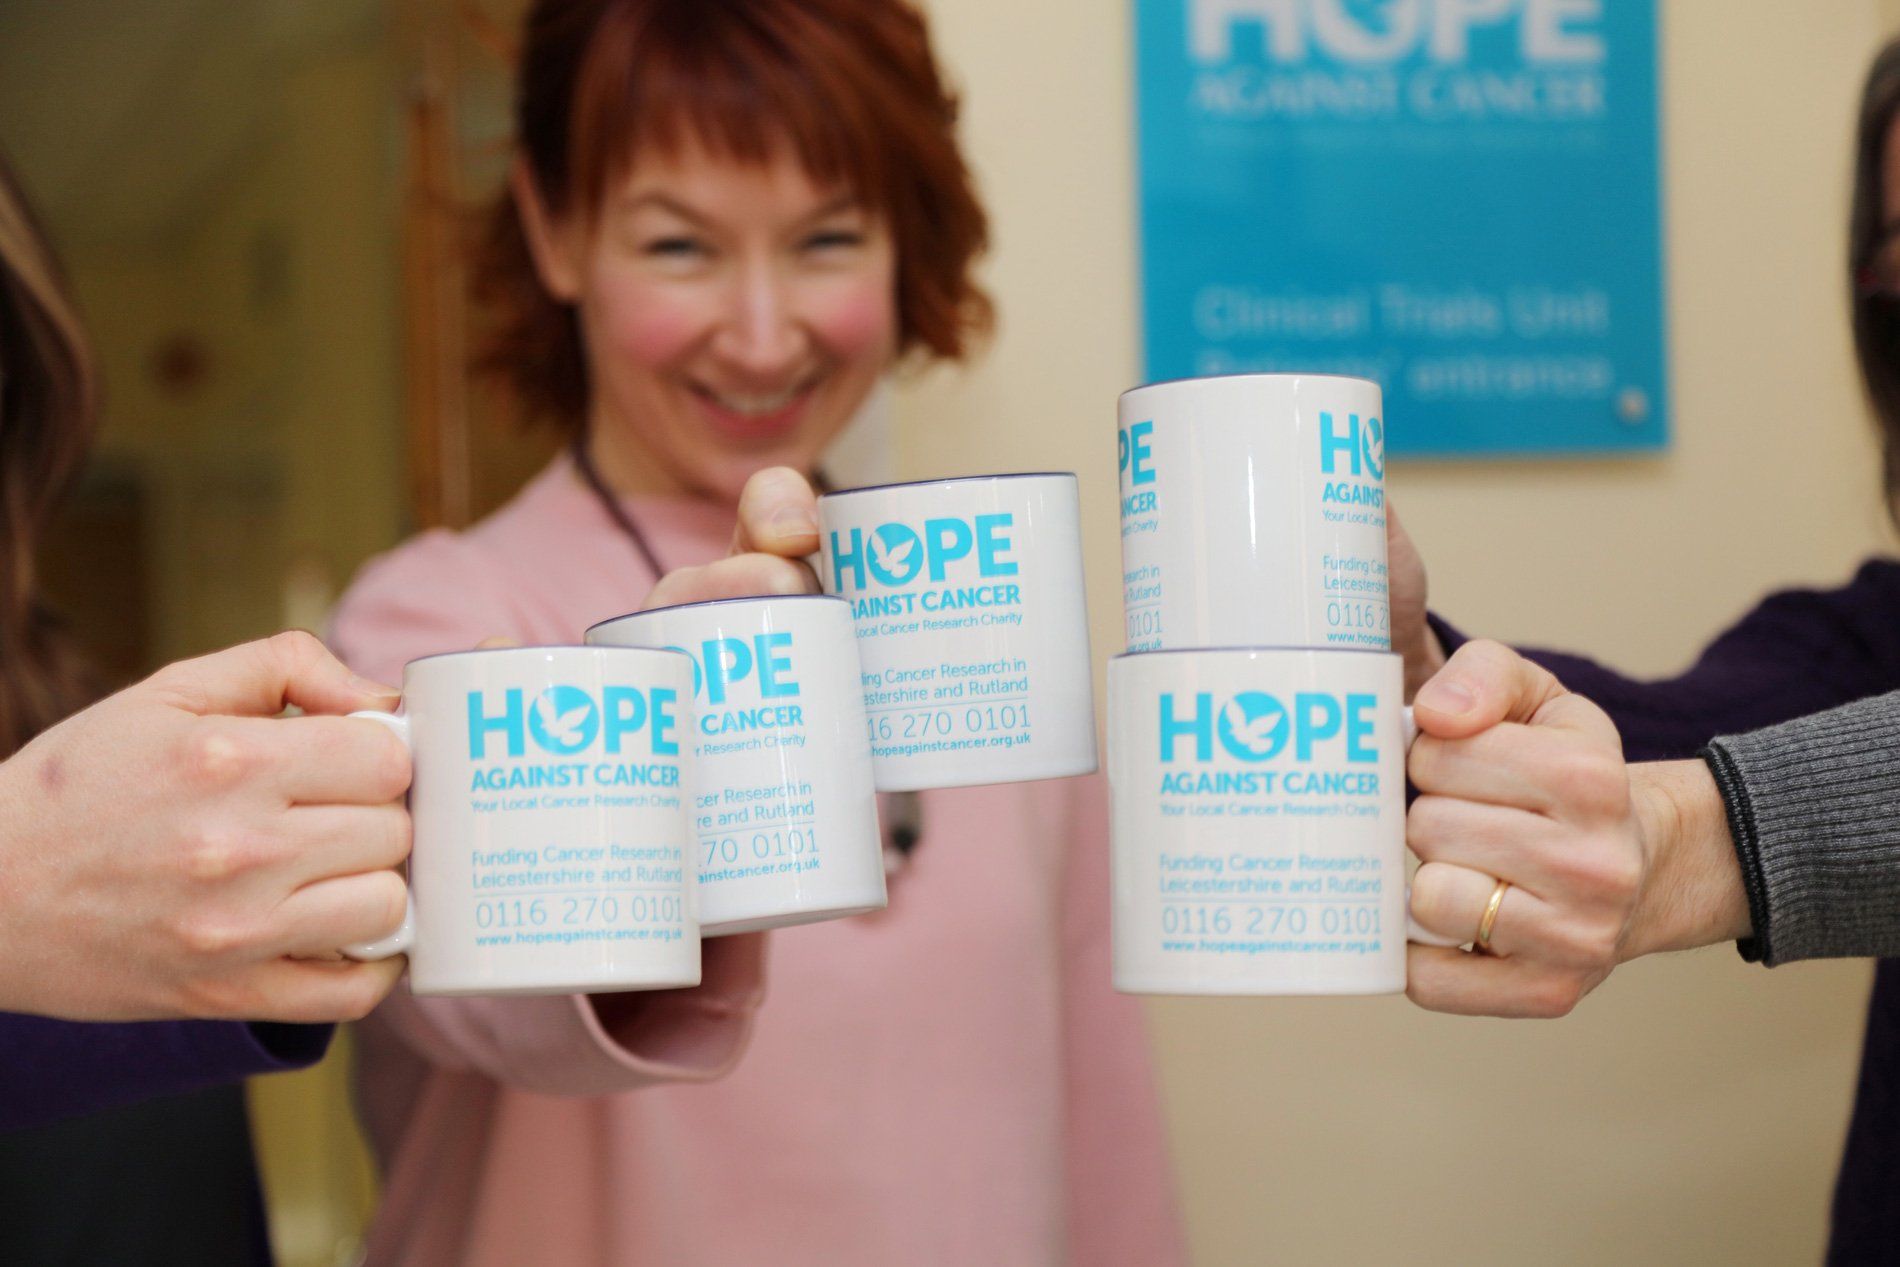 Fundraise or Volunteer for Hope Against Cancer